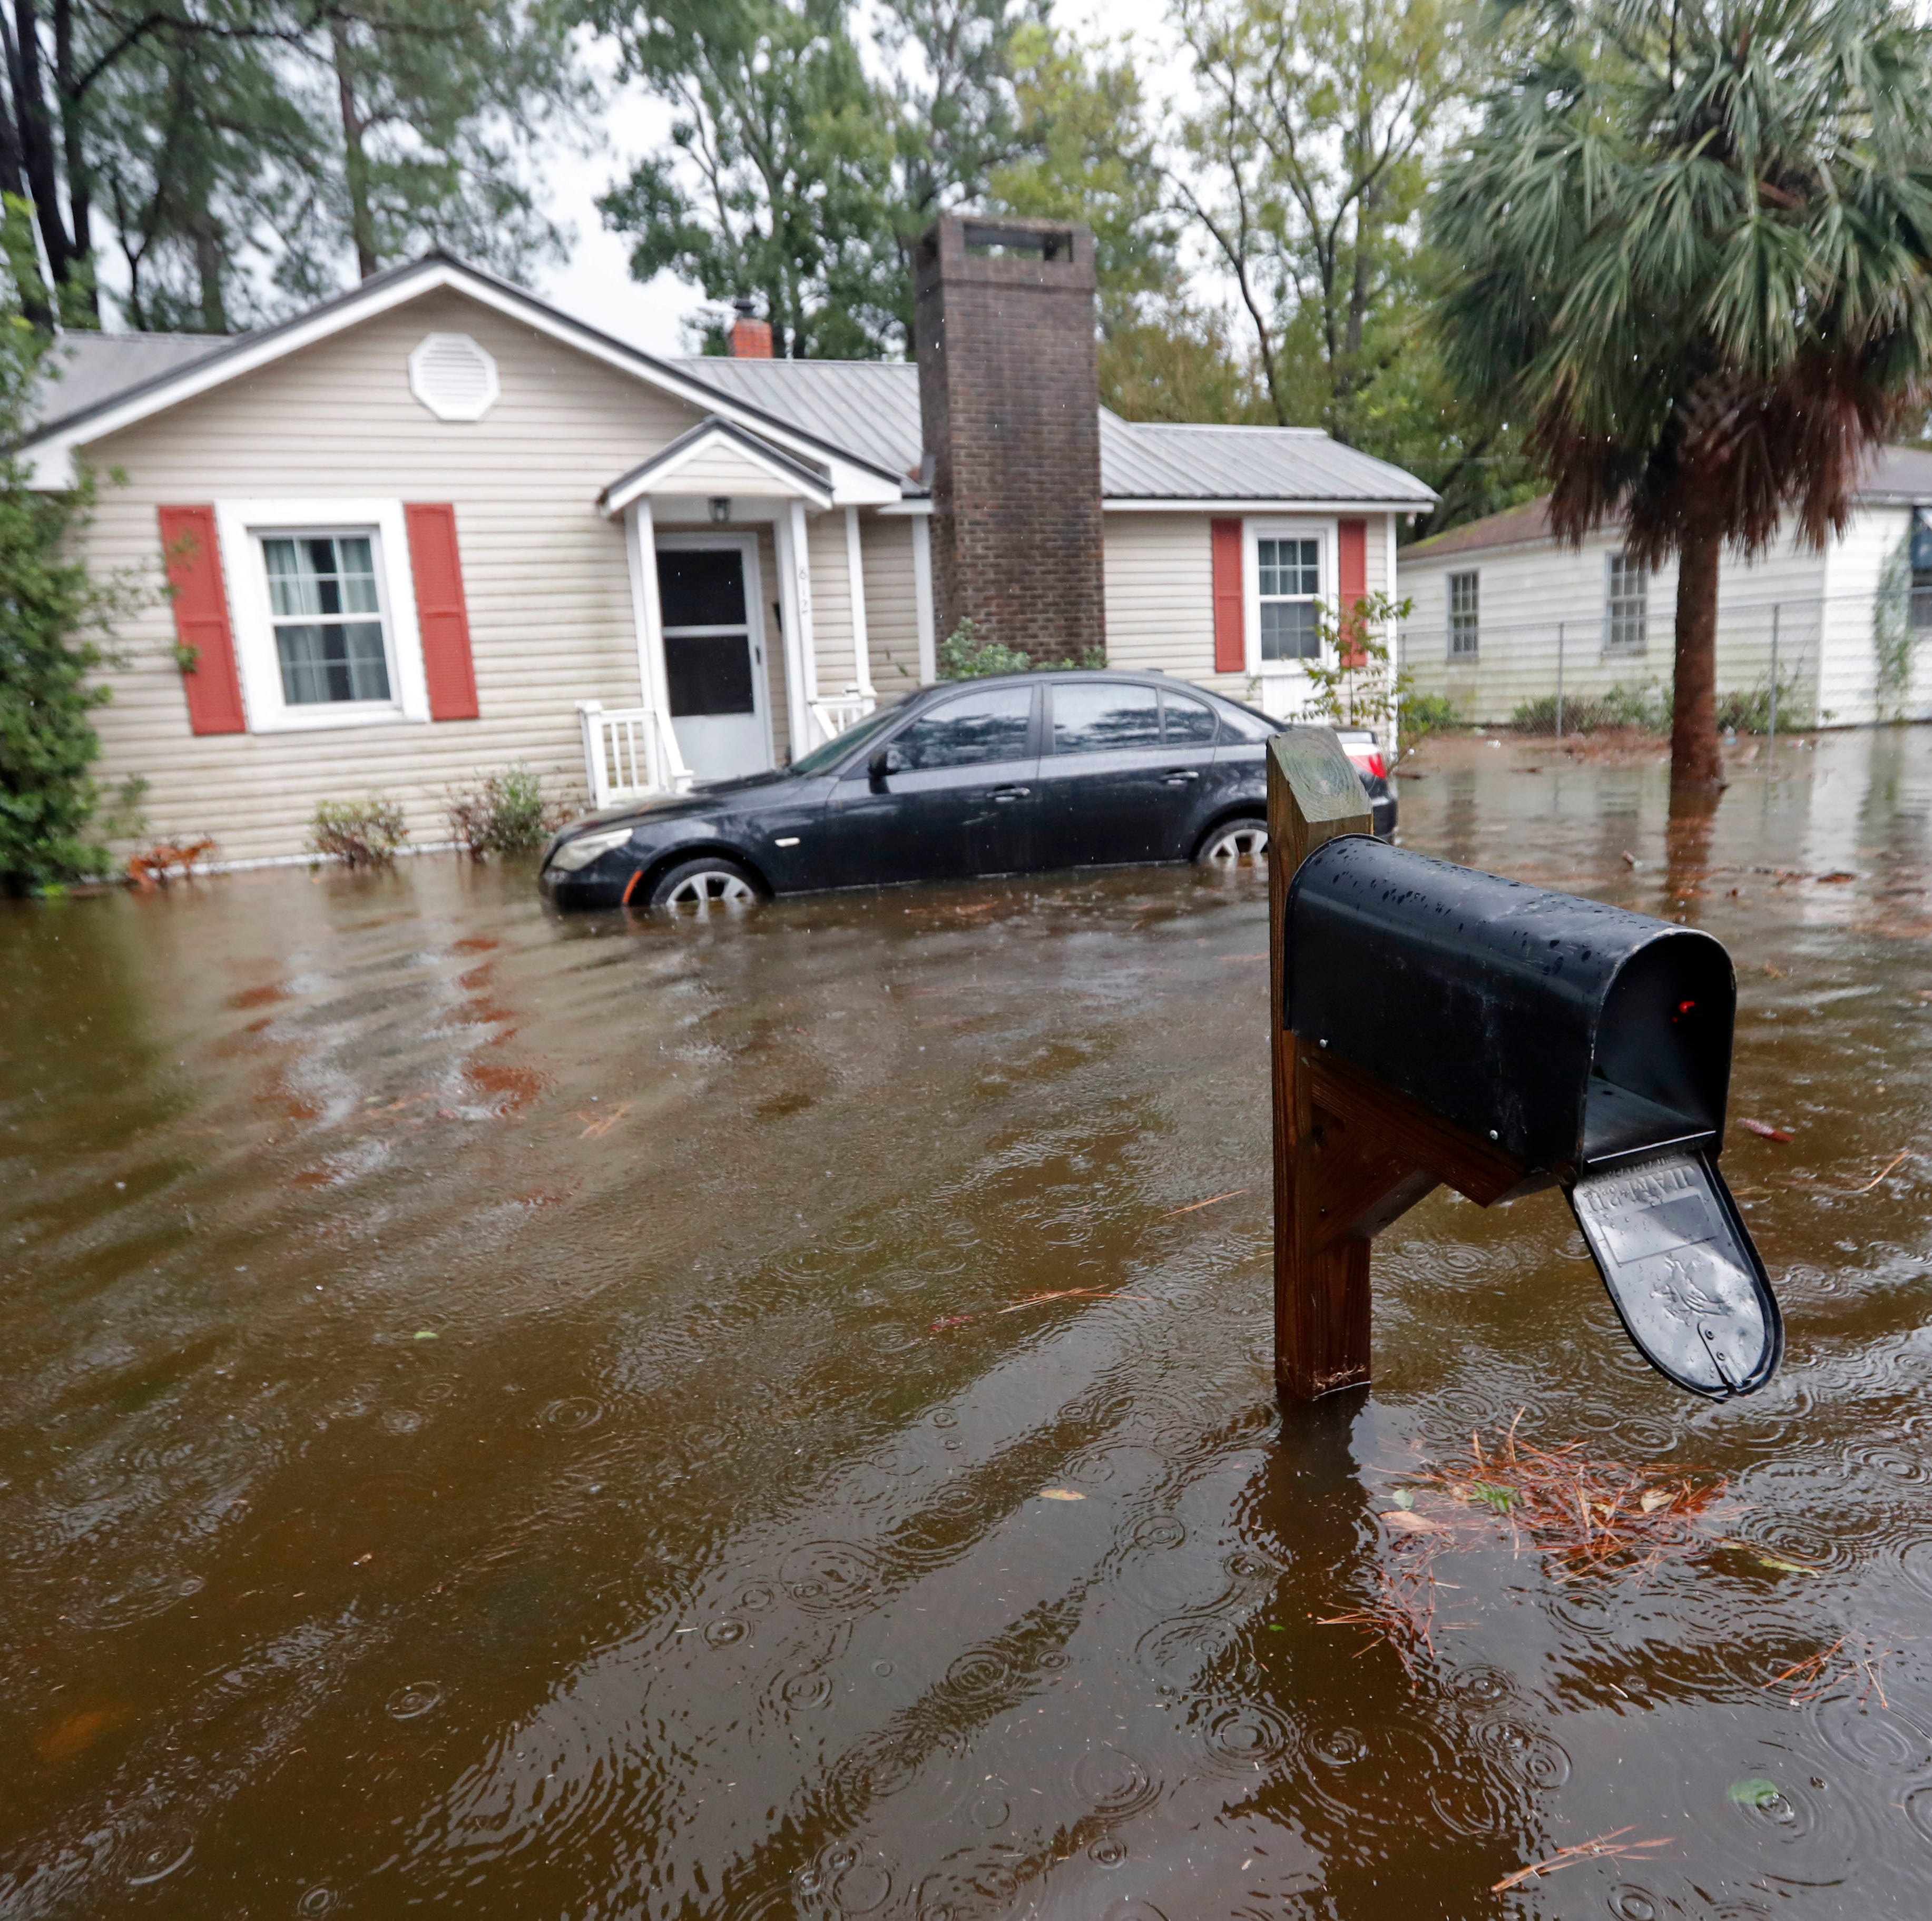 Floodwaters from Hurricane Florence encroach on homes in Marion, S.C., Sunday, Sept. 16, 2018.